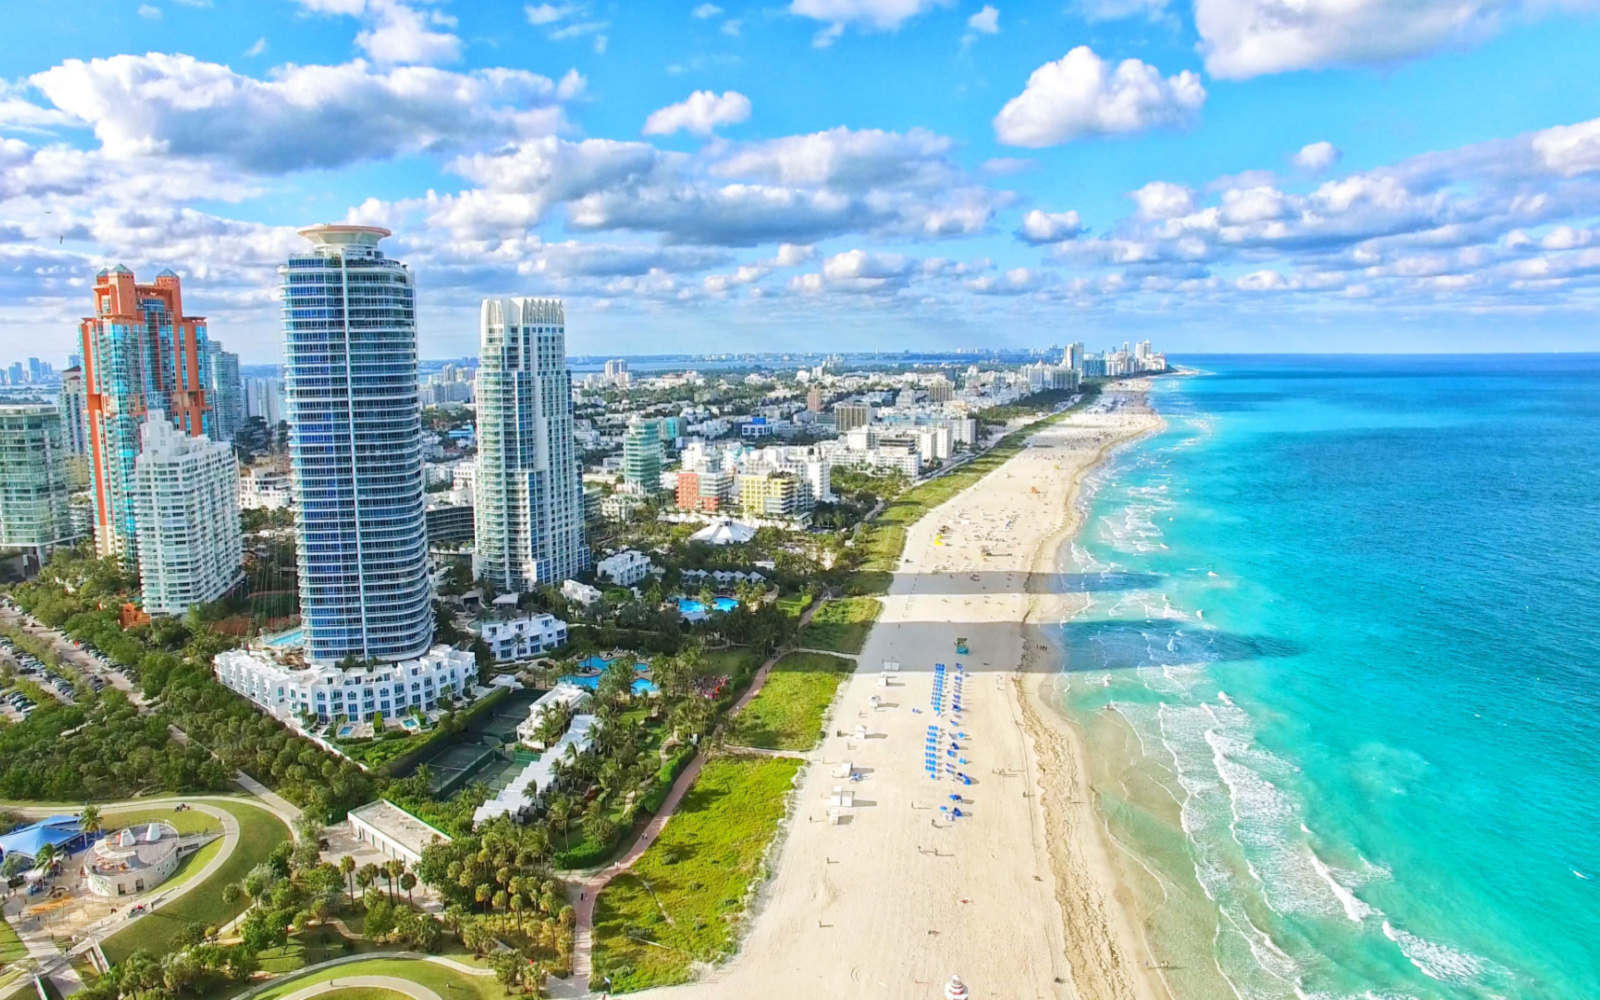 Is Miami Safe to Visit in 2022? | Safety Concerns